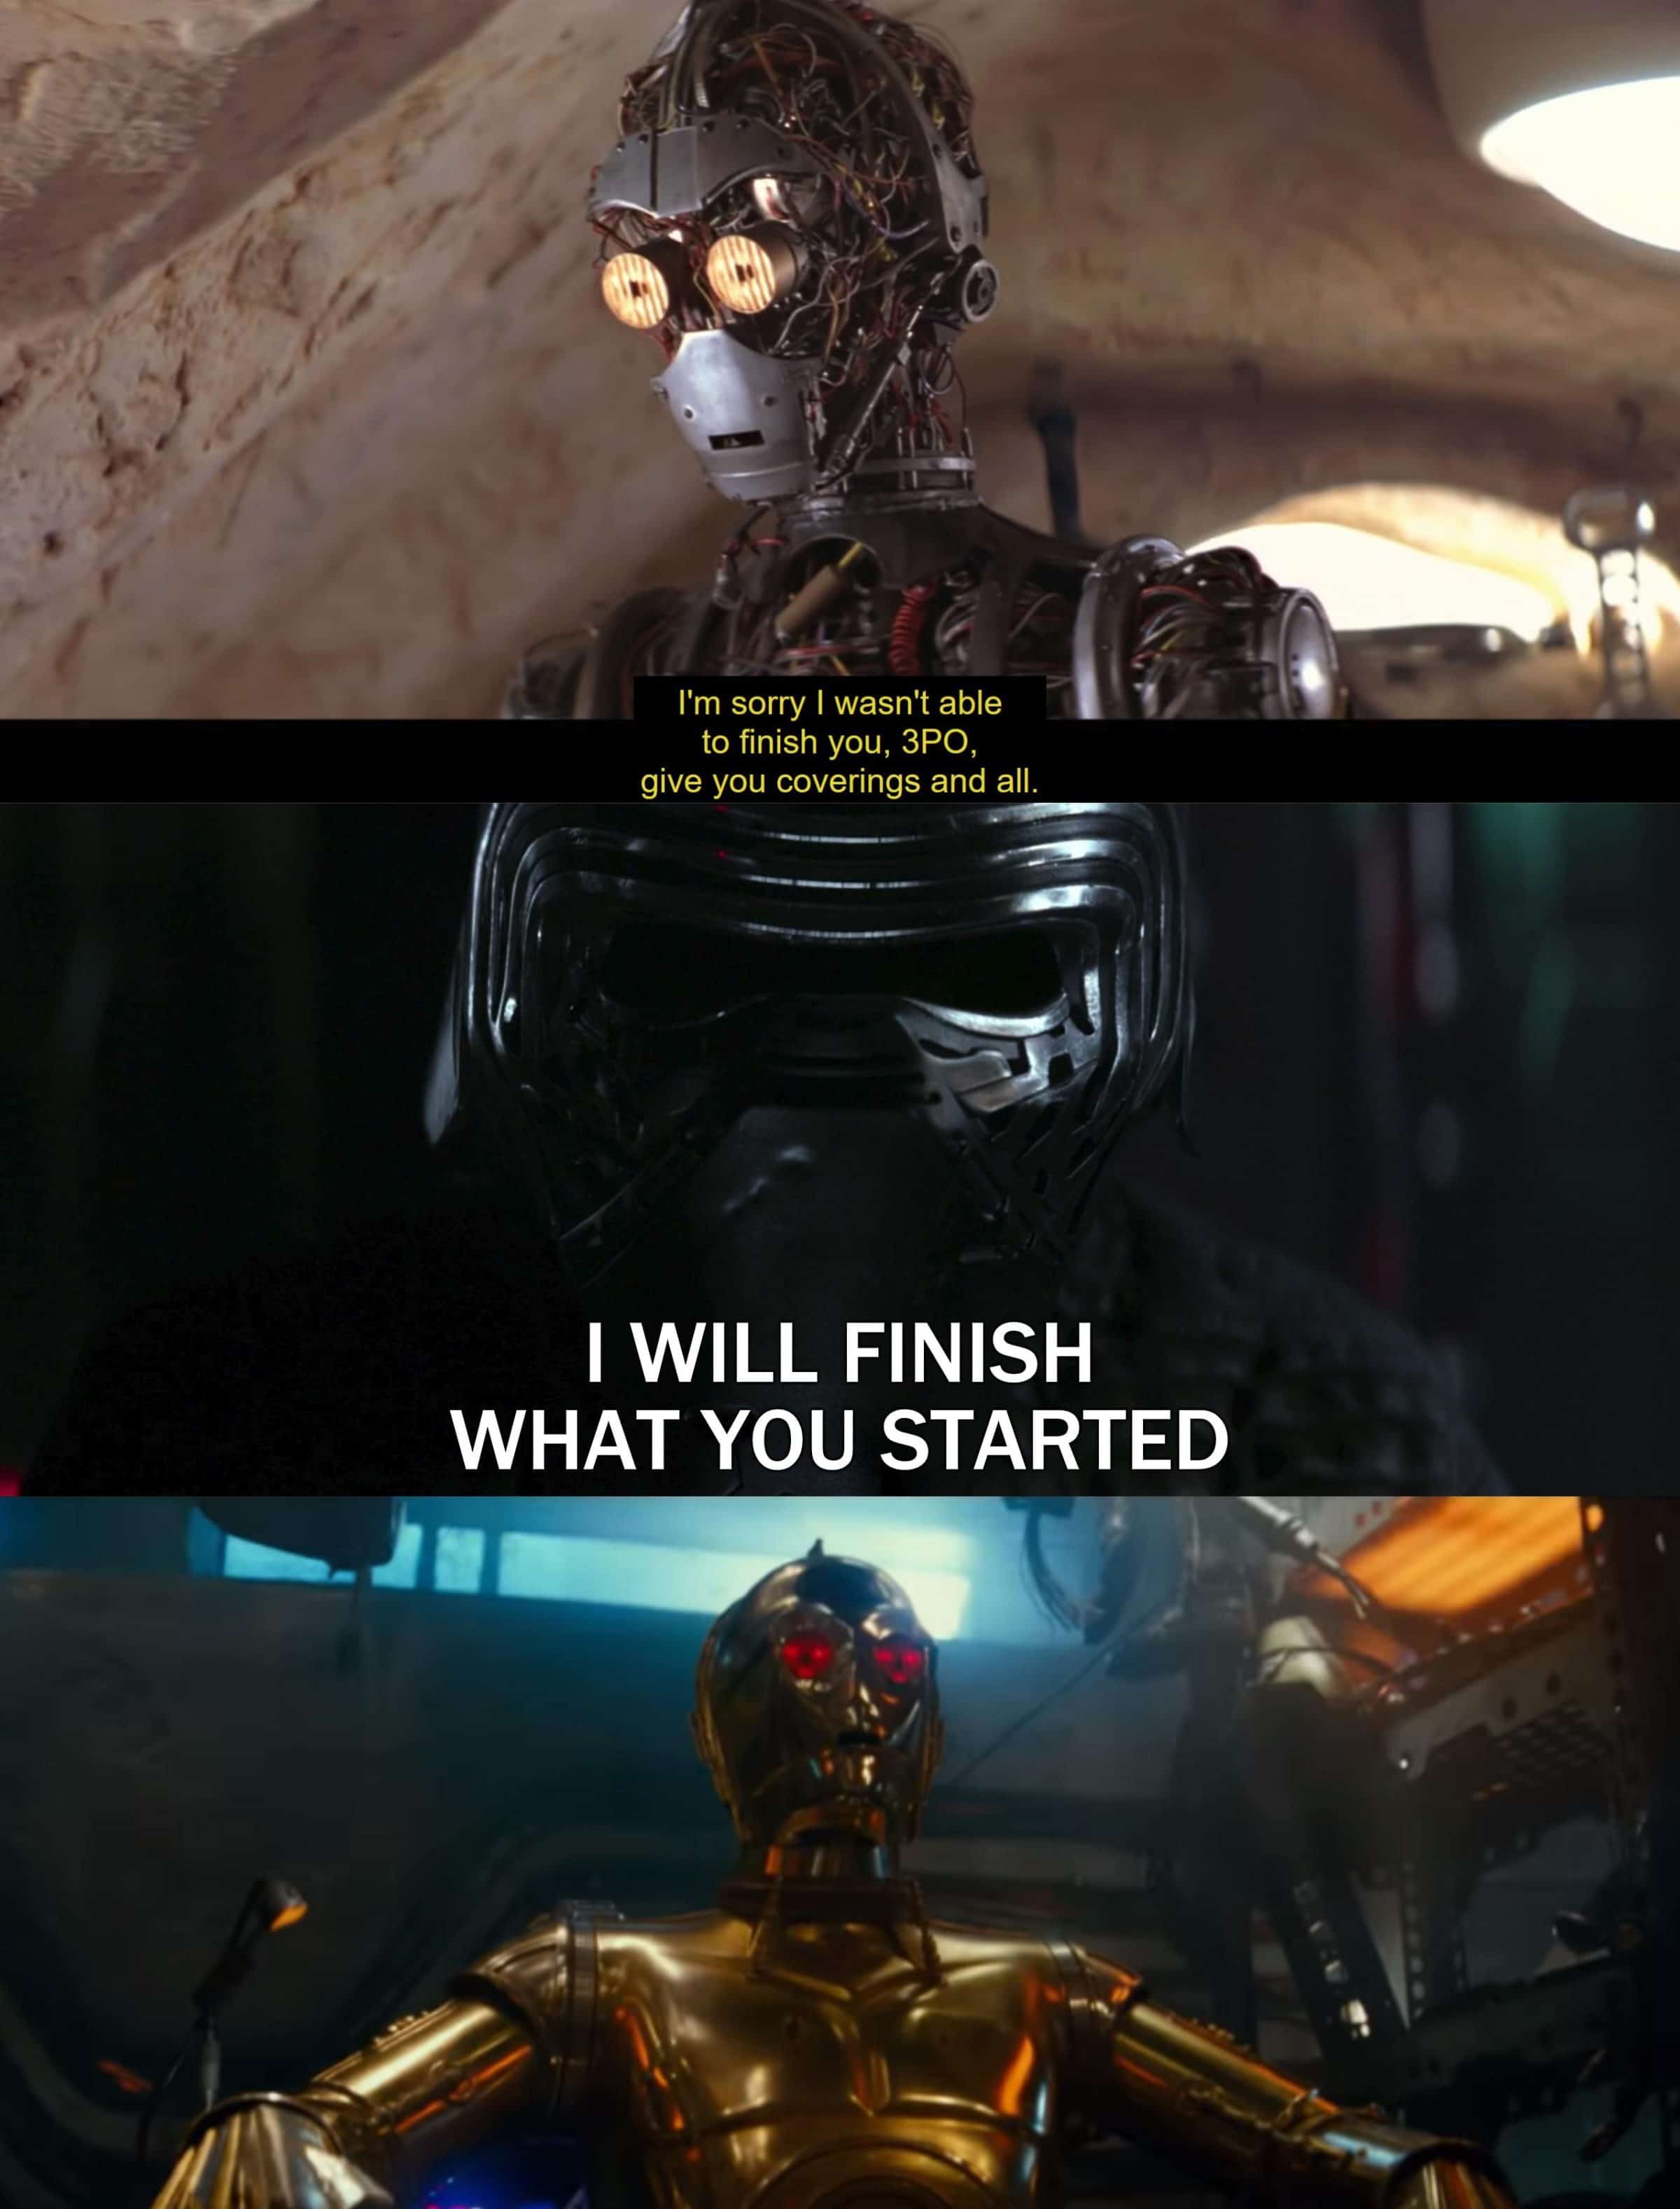 sequel-memes star-wars-memes sequel-memes text: I'm sorry I wasn't able to finish you, 3PO, give you coverings and all. I WILL FINISH WHAT YOU STARTED 